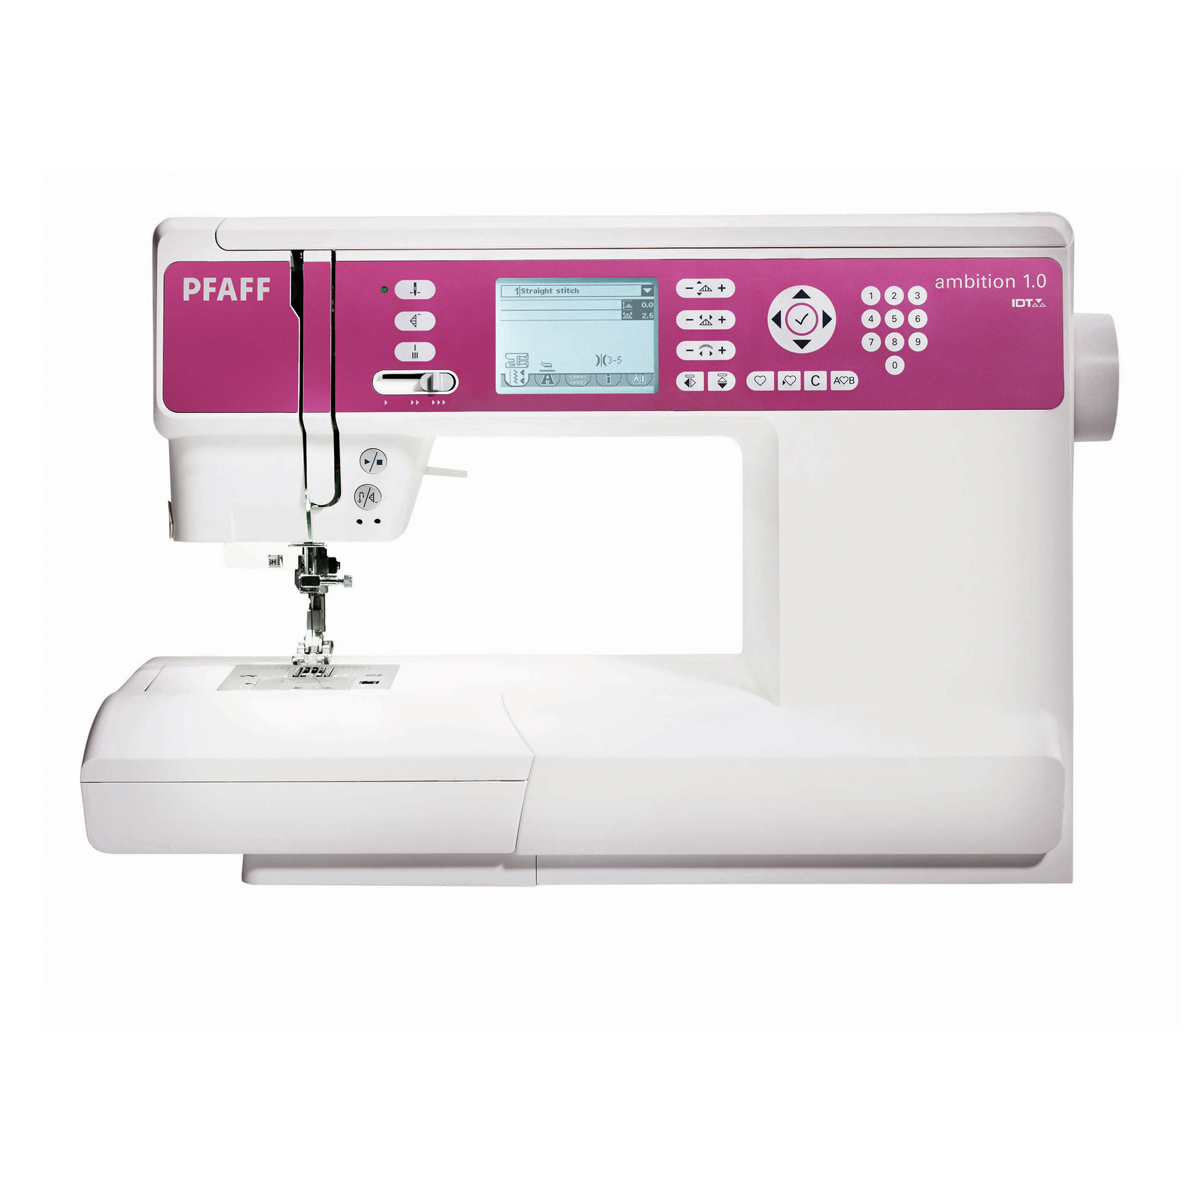 SMARTER BY PFAFF 140s Sewing Machine for beginners